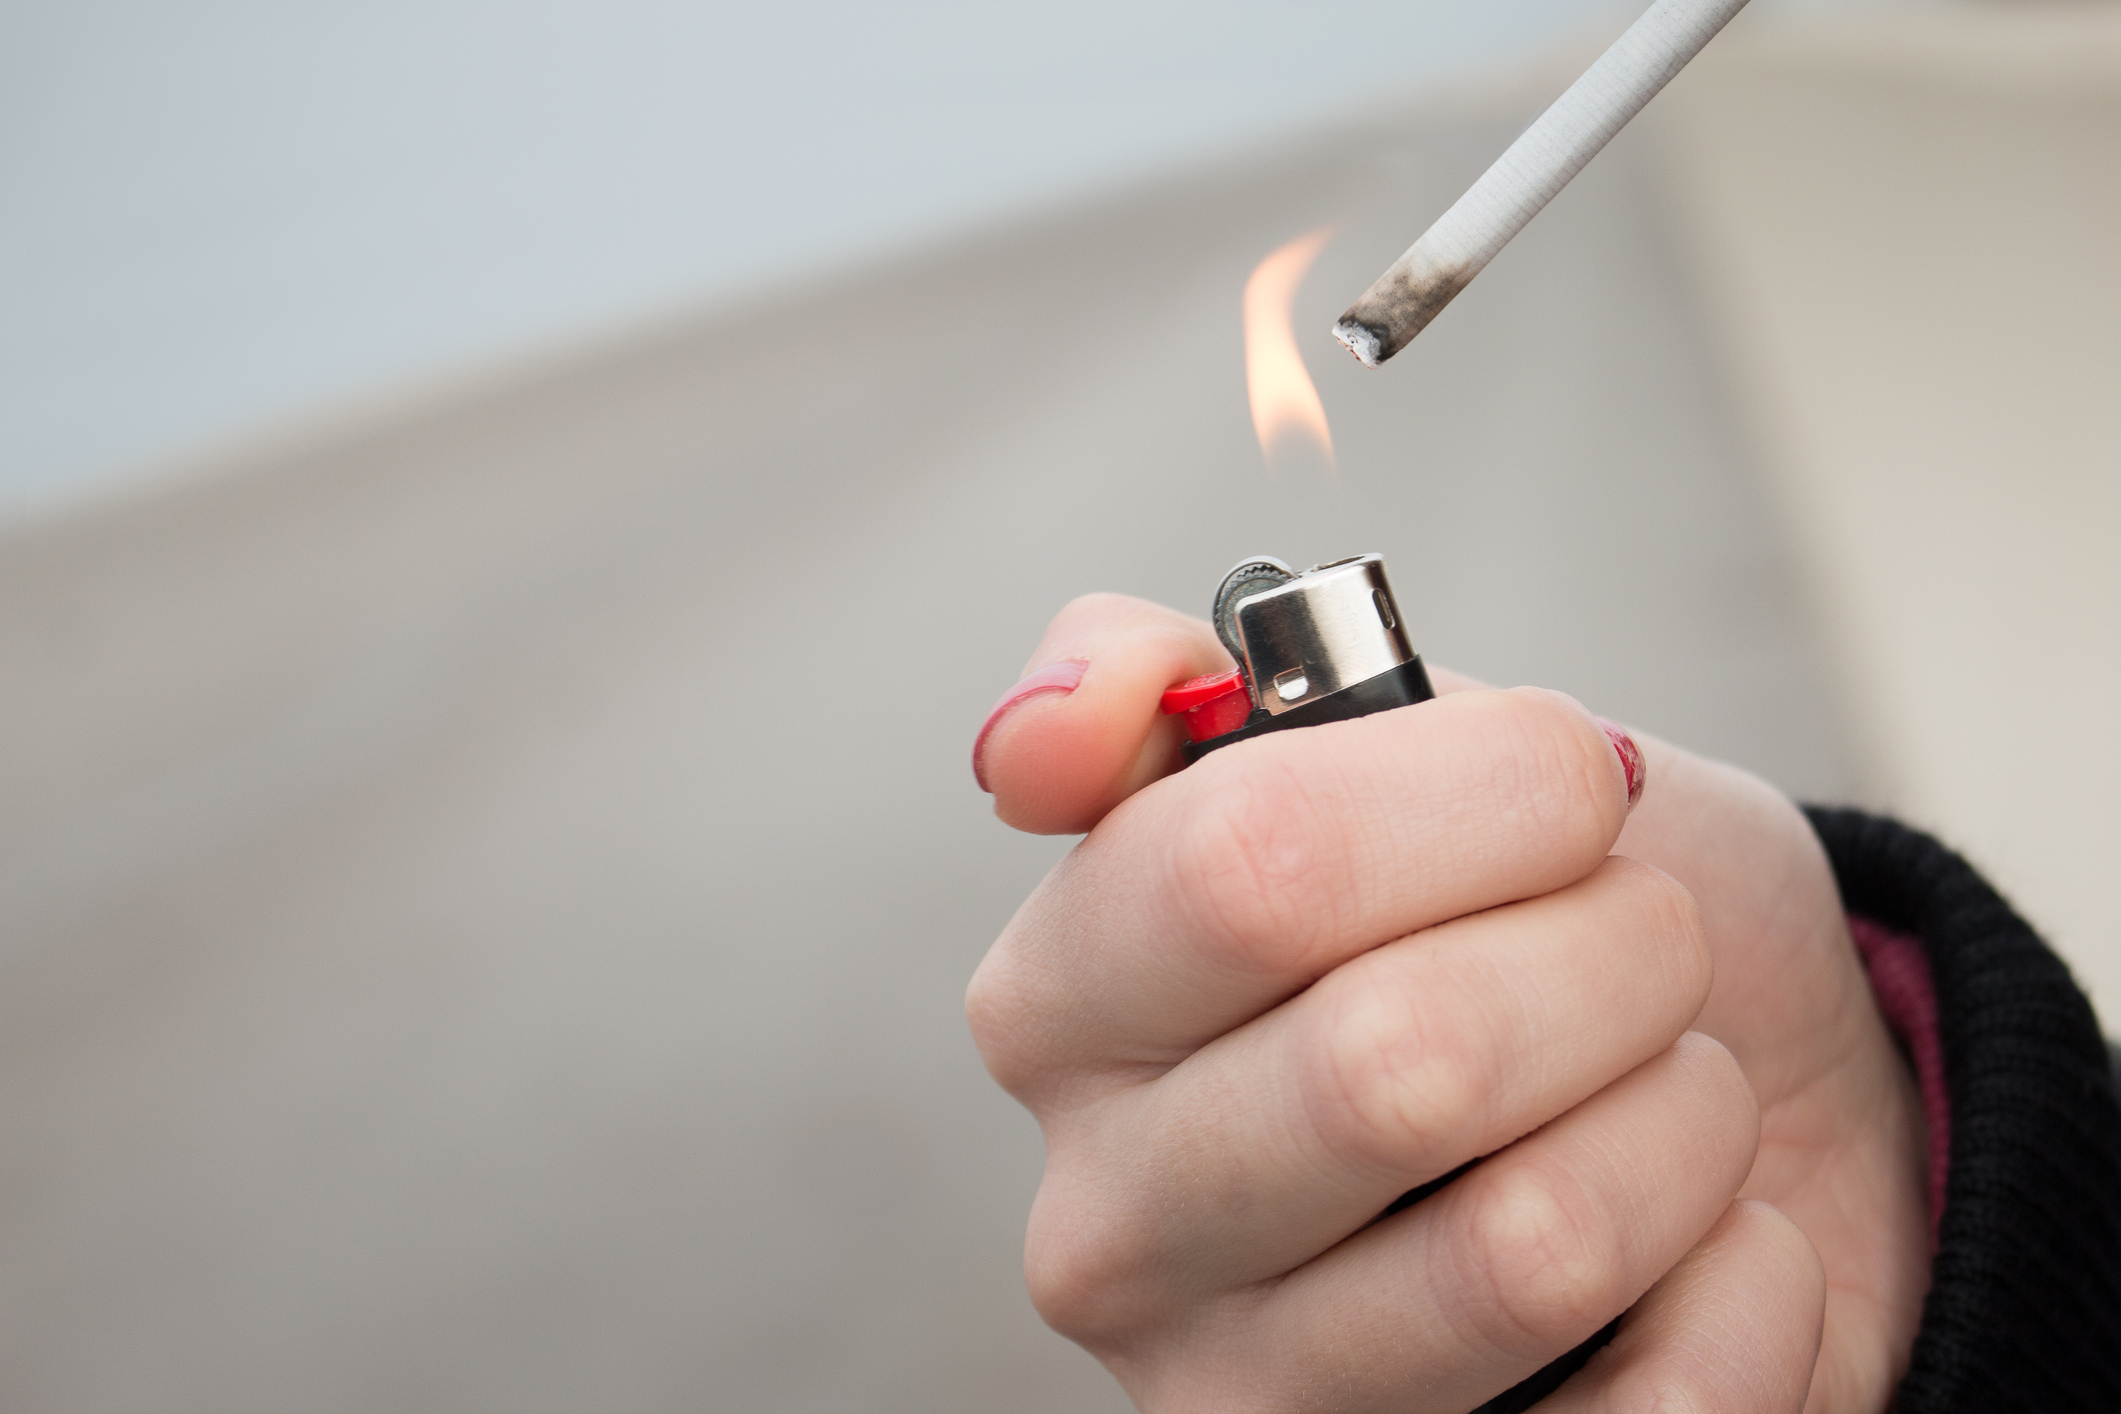 delay lighting up a cigarette to quit smoking